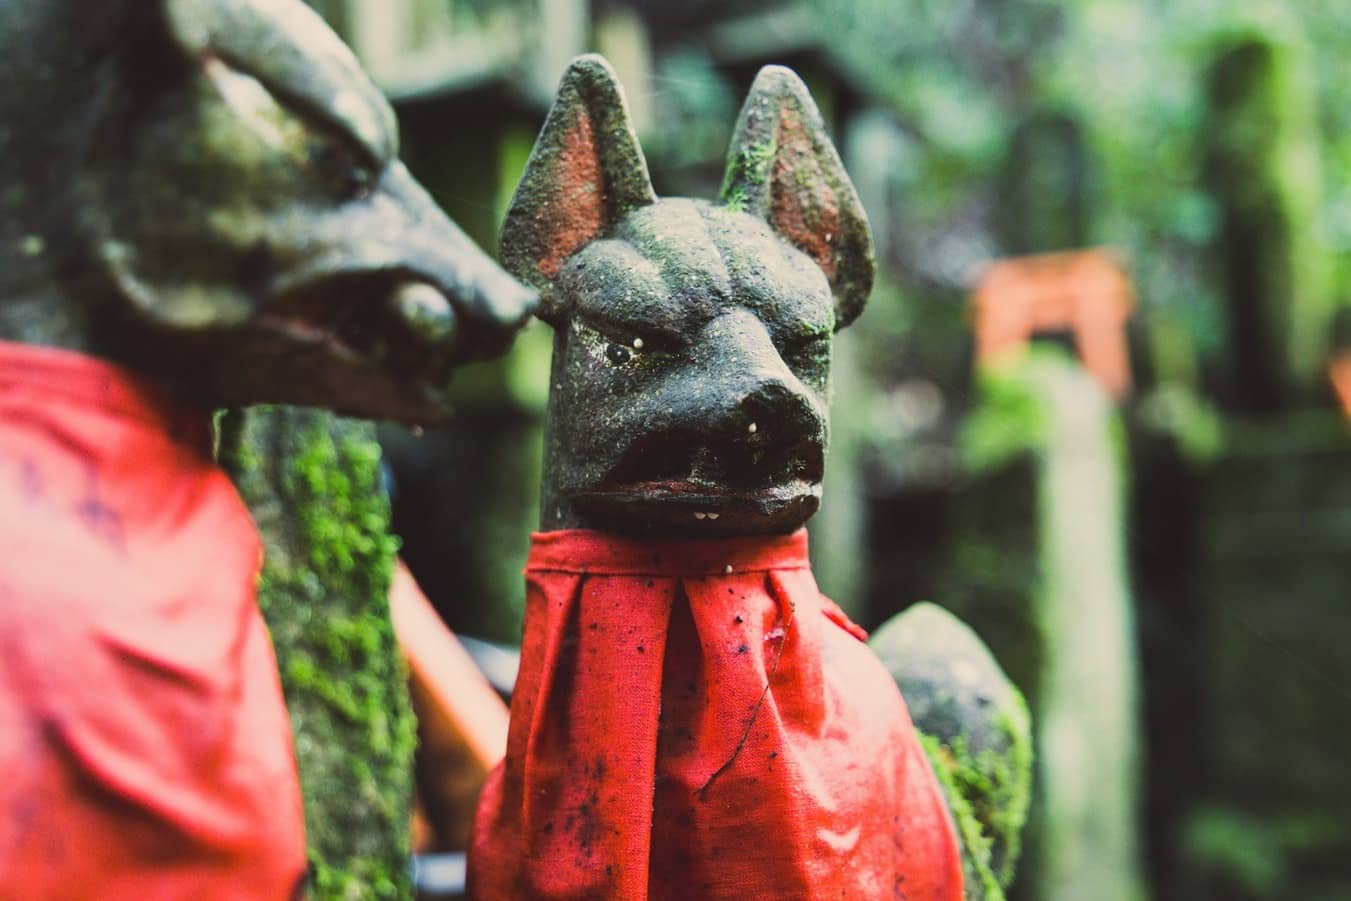 A Traveller’s Guide To The Kyoto Fox Shrine: Home Of The Mythical Inari Foxes